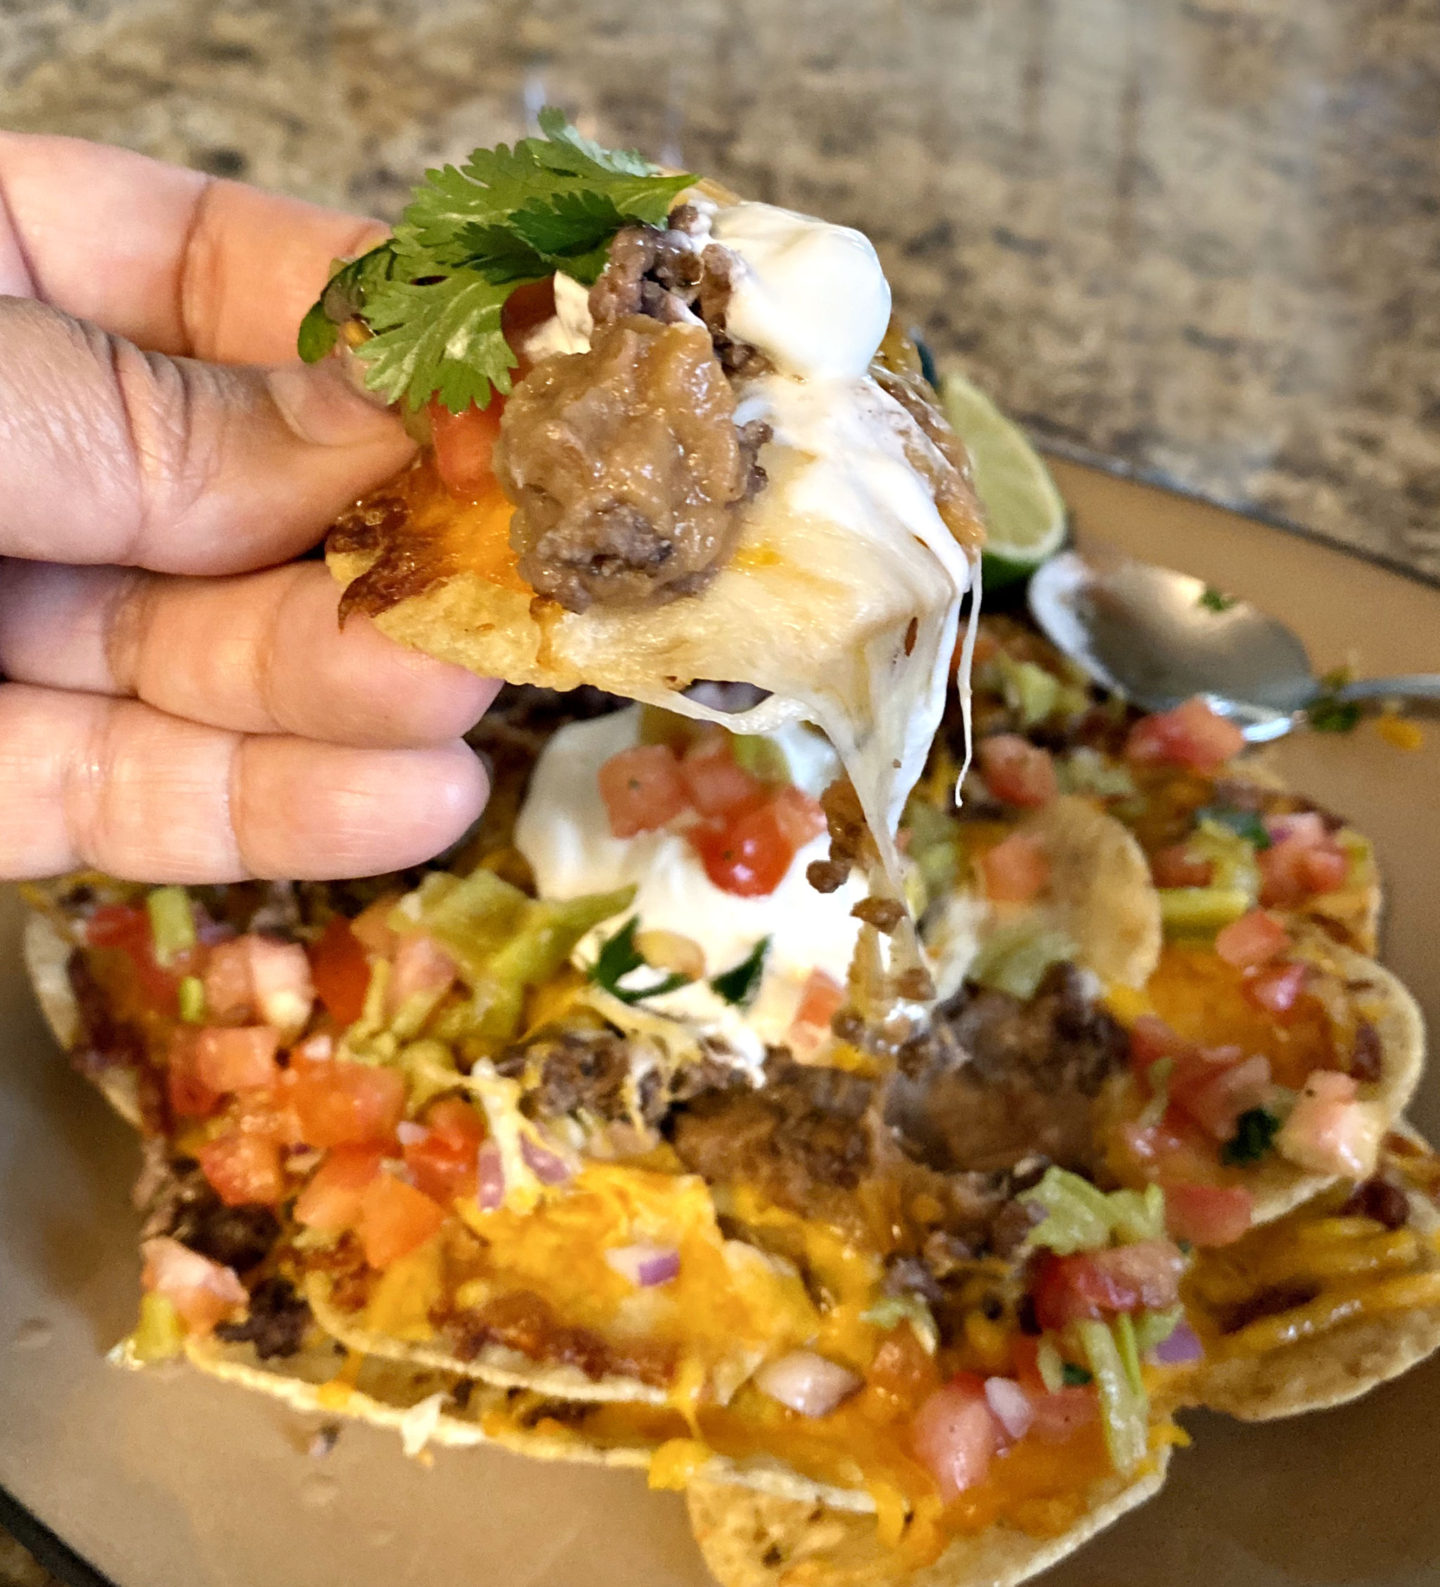 plate of nachos and close up of hand holding a loaded chip